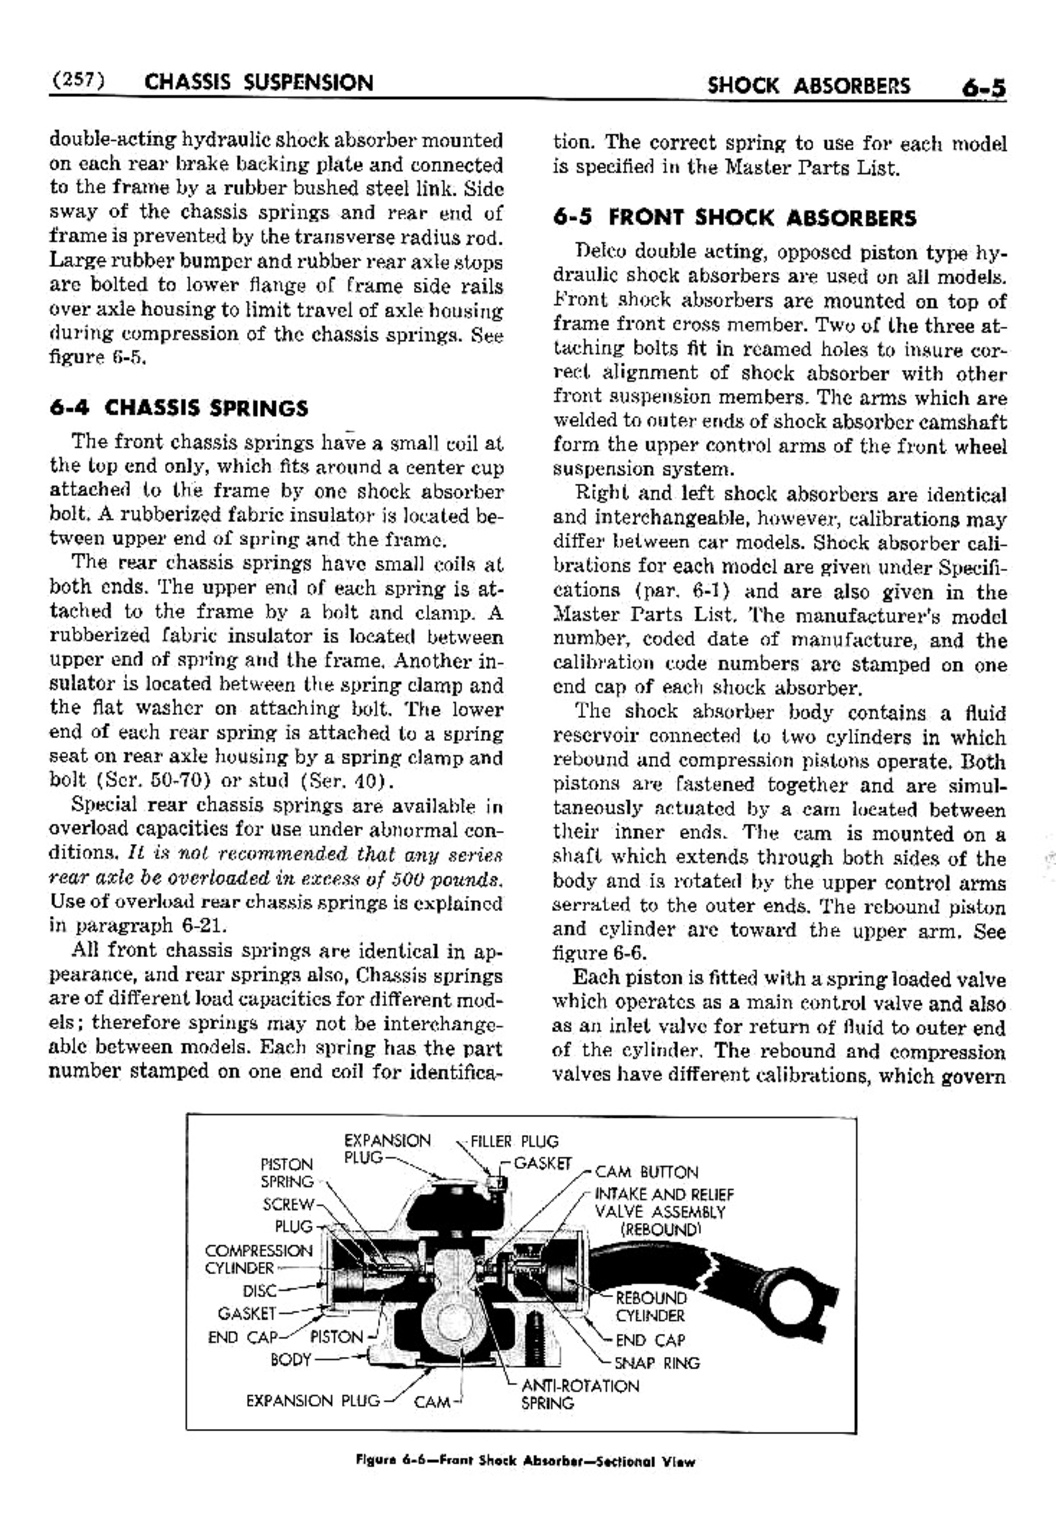 n_07 1952 Buick Shop Manual - Chassis Suspension-005-005.jpg